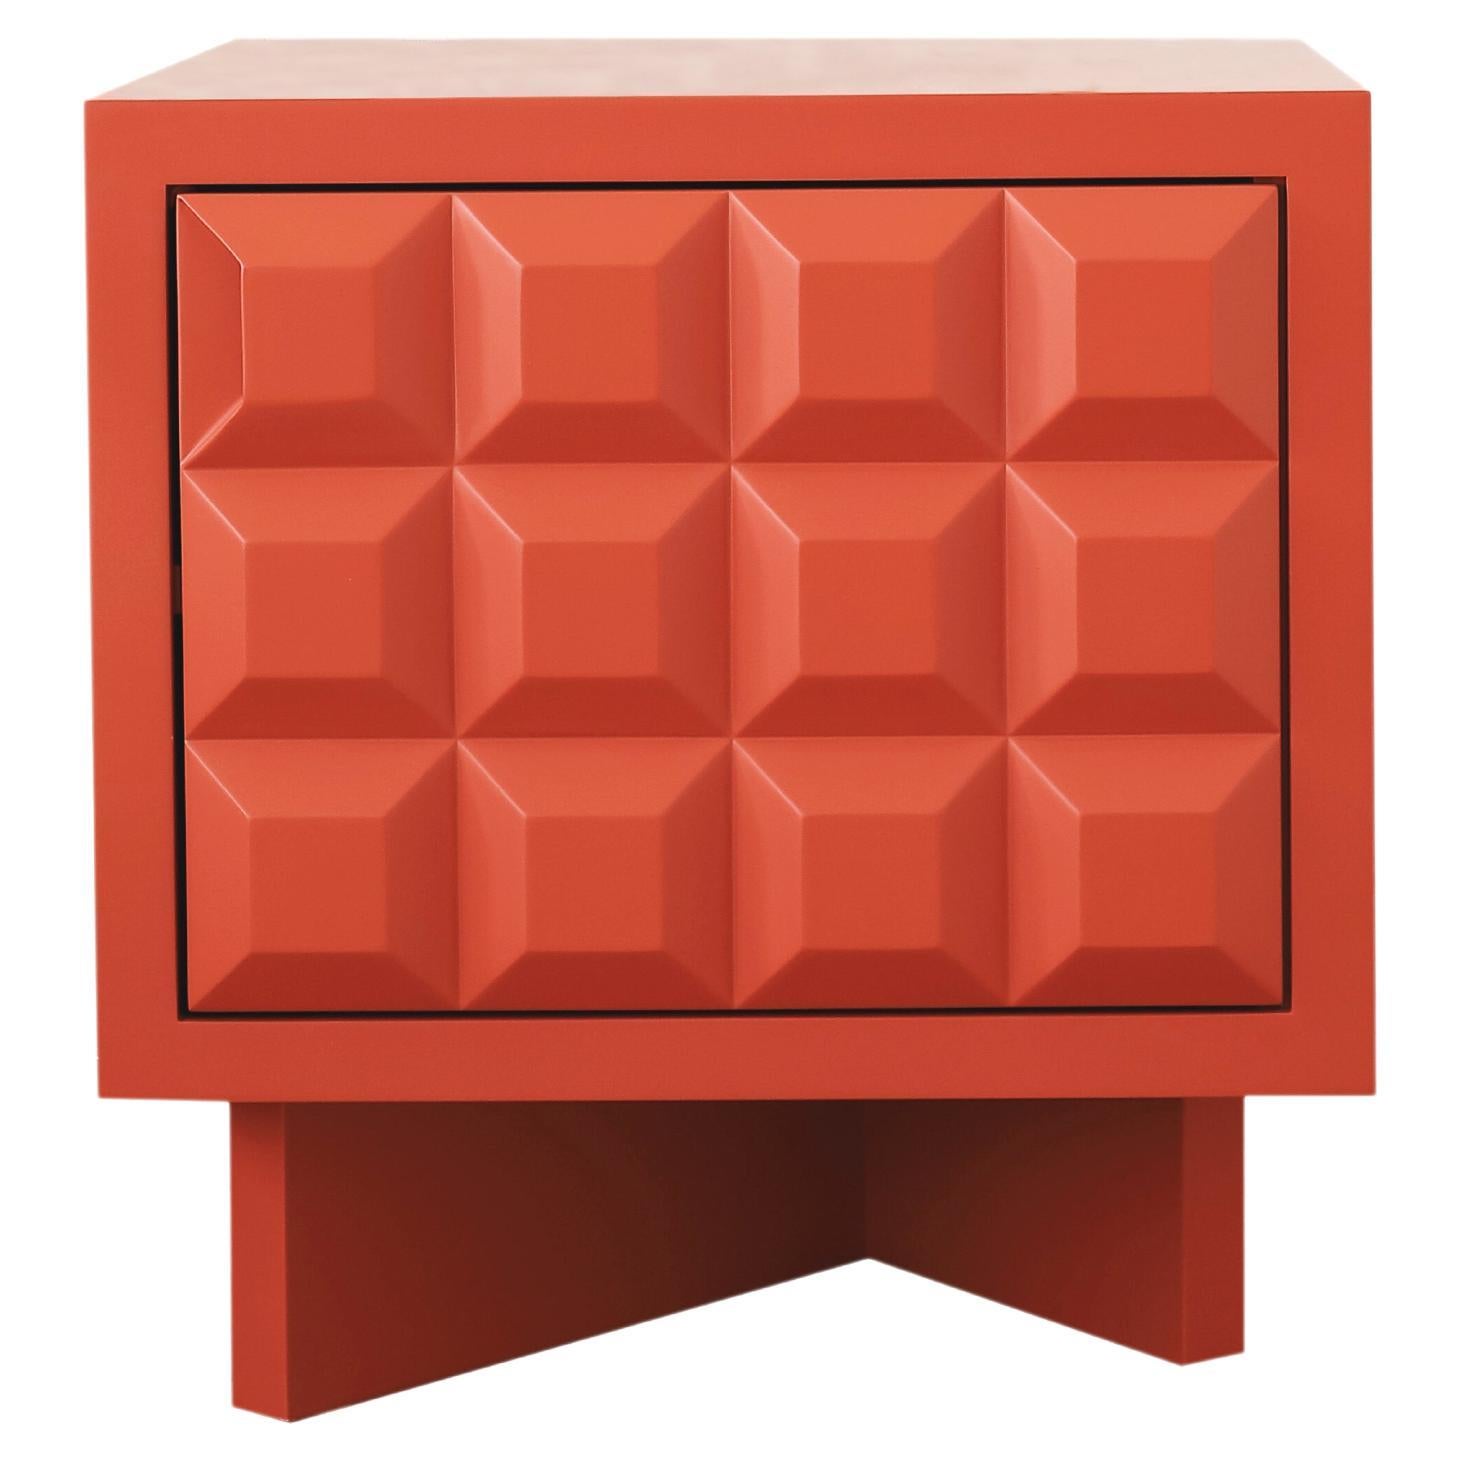  Karo Nightstand Inspired by Brutalism with Outstanding Look - Coral Colour For Sale